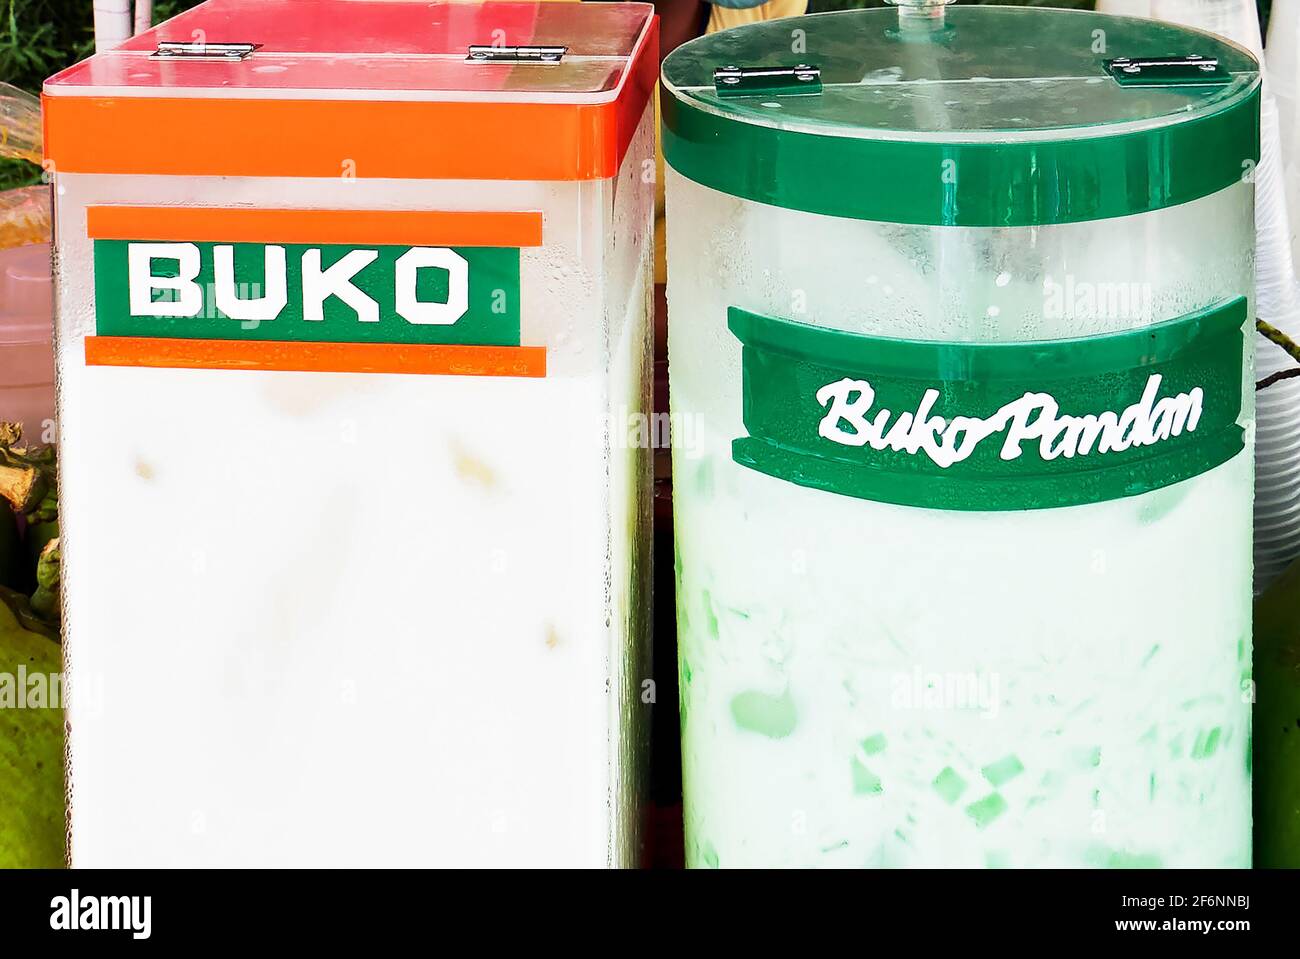 Close-up of Philippine coconut juice, called Buko juice, mixed with Pandan flavor, offered by street vendors in acrylic glass containers Stock Photo